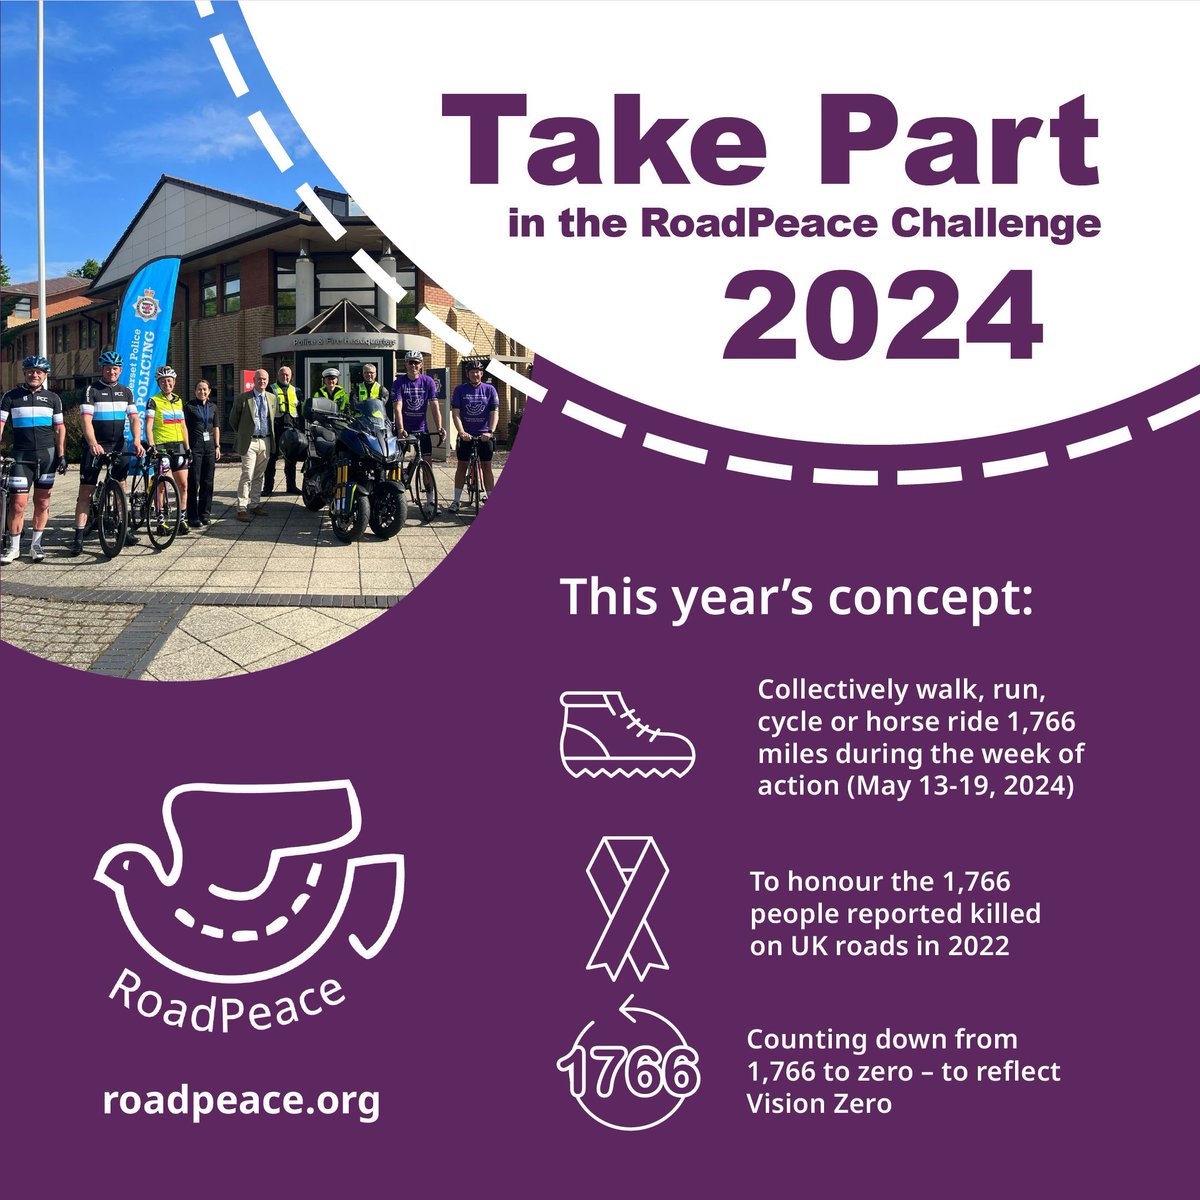 Supporters of the #RoadPeaceChallenge2024 will be #walking, #running, #cycling and #horseriding 1766 miles to honour the 1766 people reported killed on UK roads in 2022. Anybody can take part. No distance too short. Sign up here 👉buff.ly/3Q9xnAf #1766MilesTogether